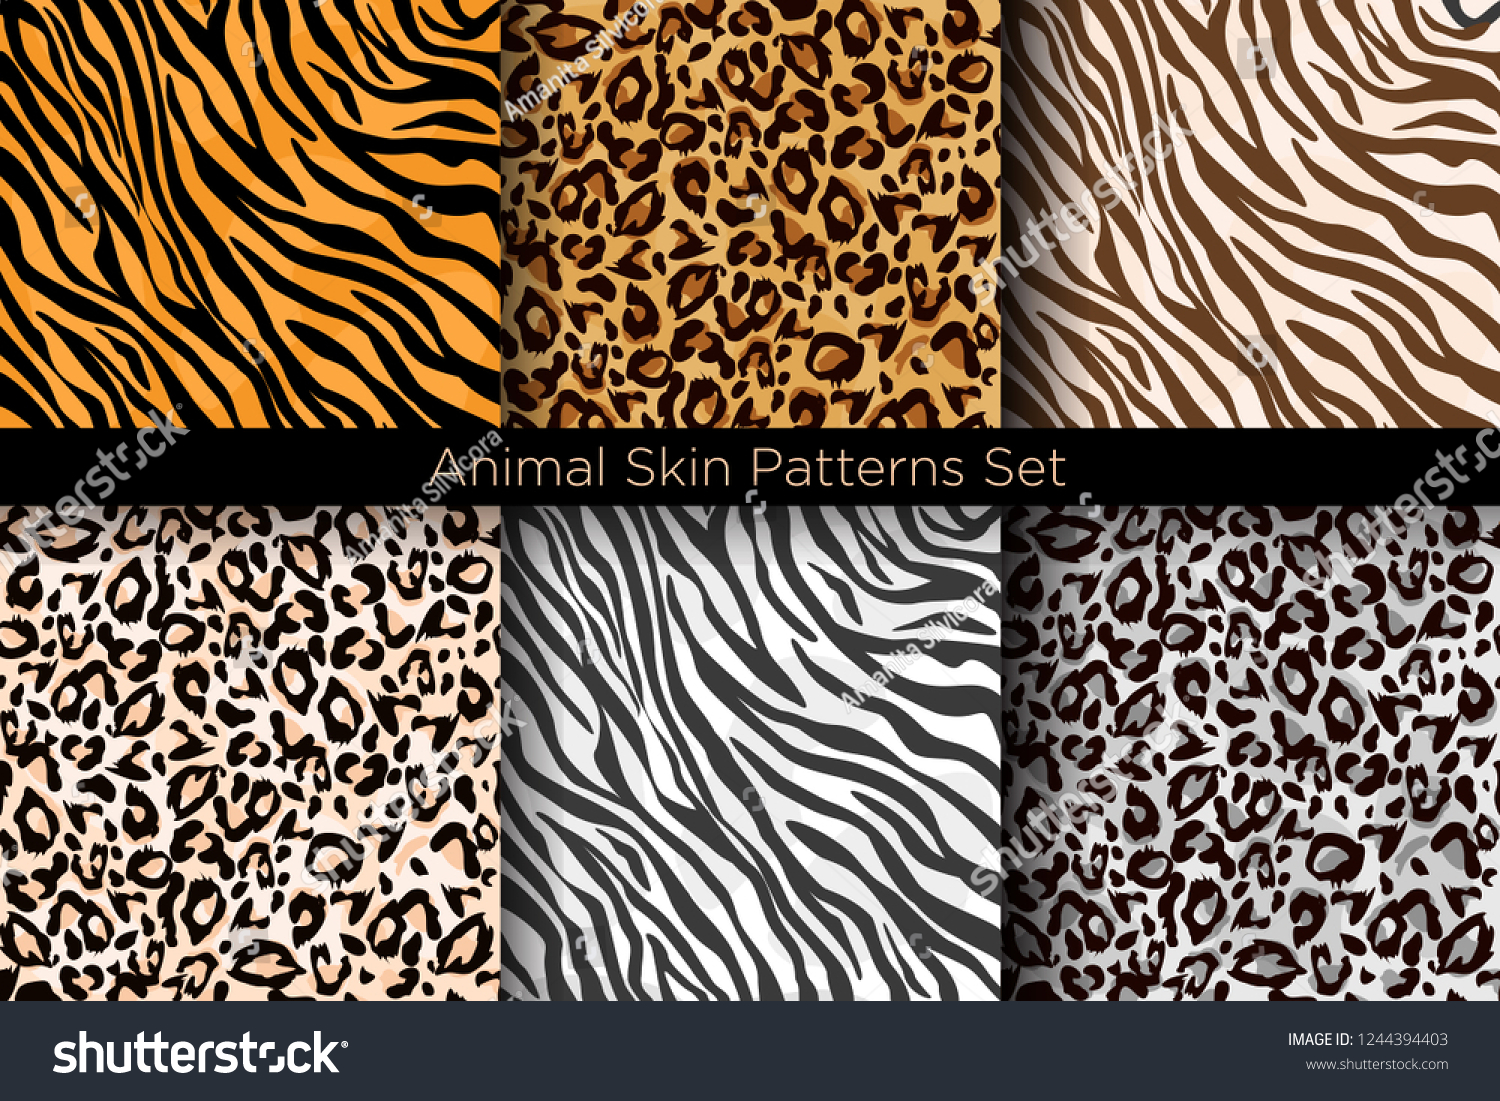 SVG of Vector illustration set of animal seamless prints. Tiger and leopard patterns collection in different colors in flat style. svg